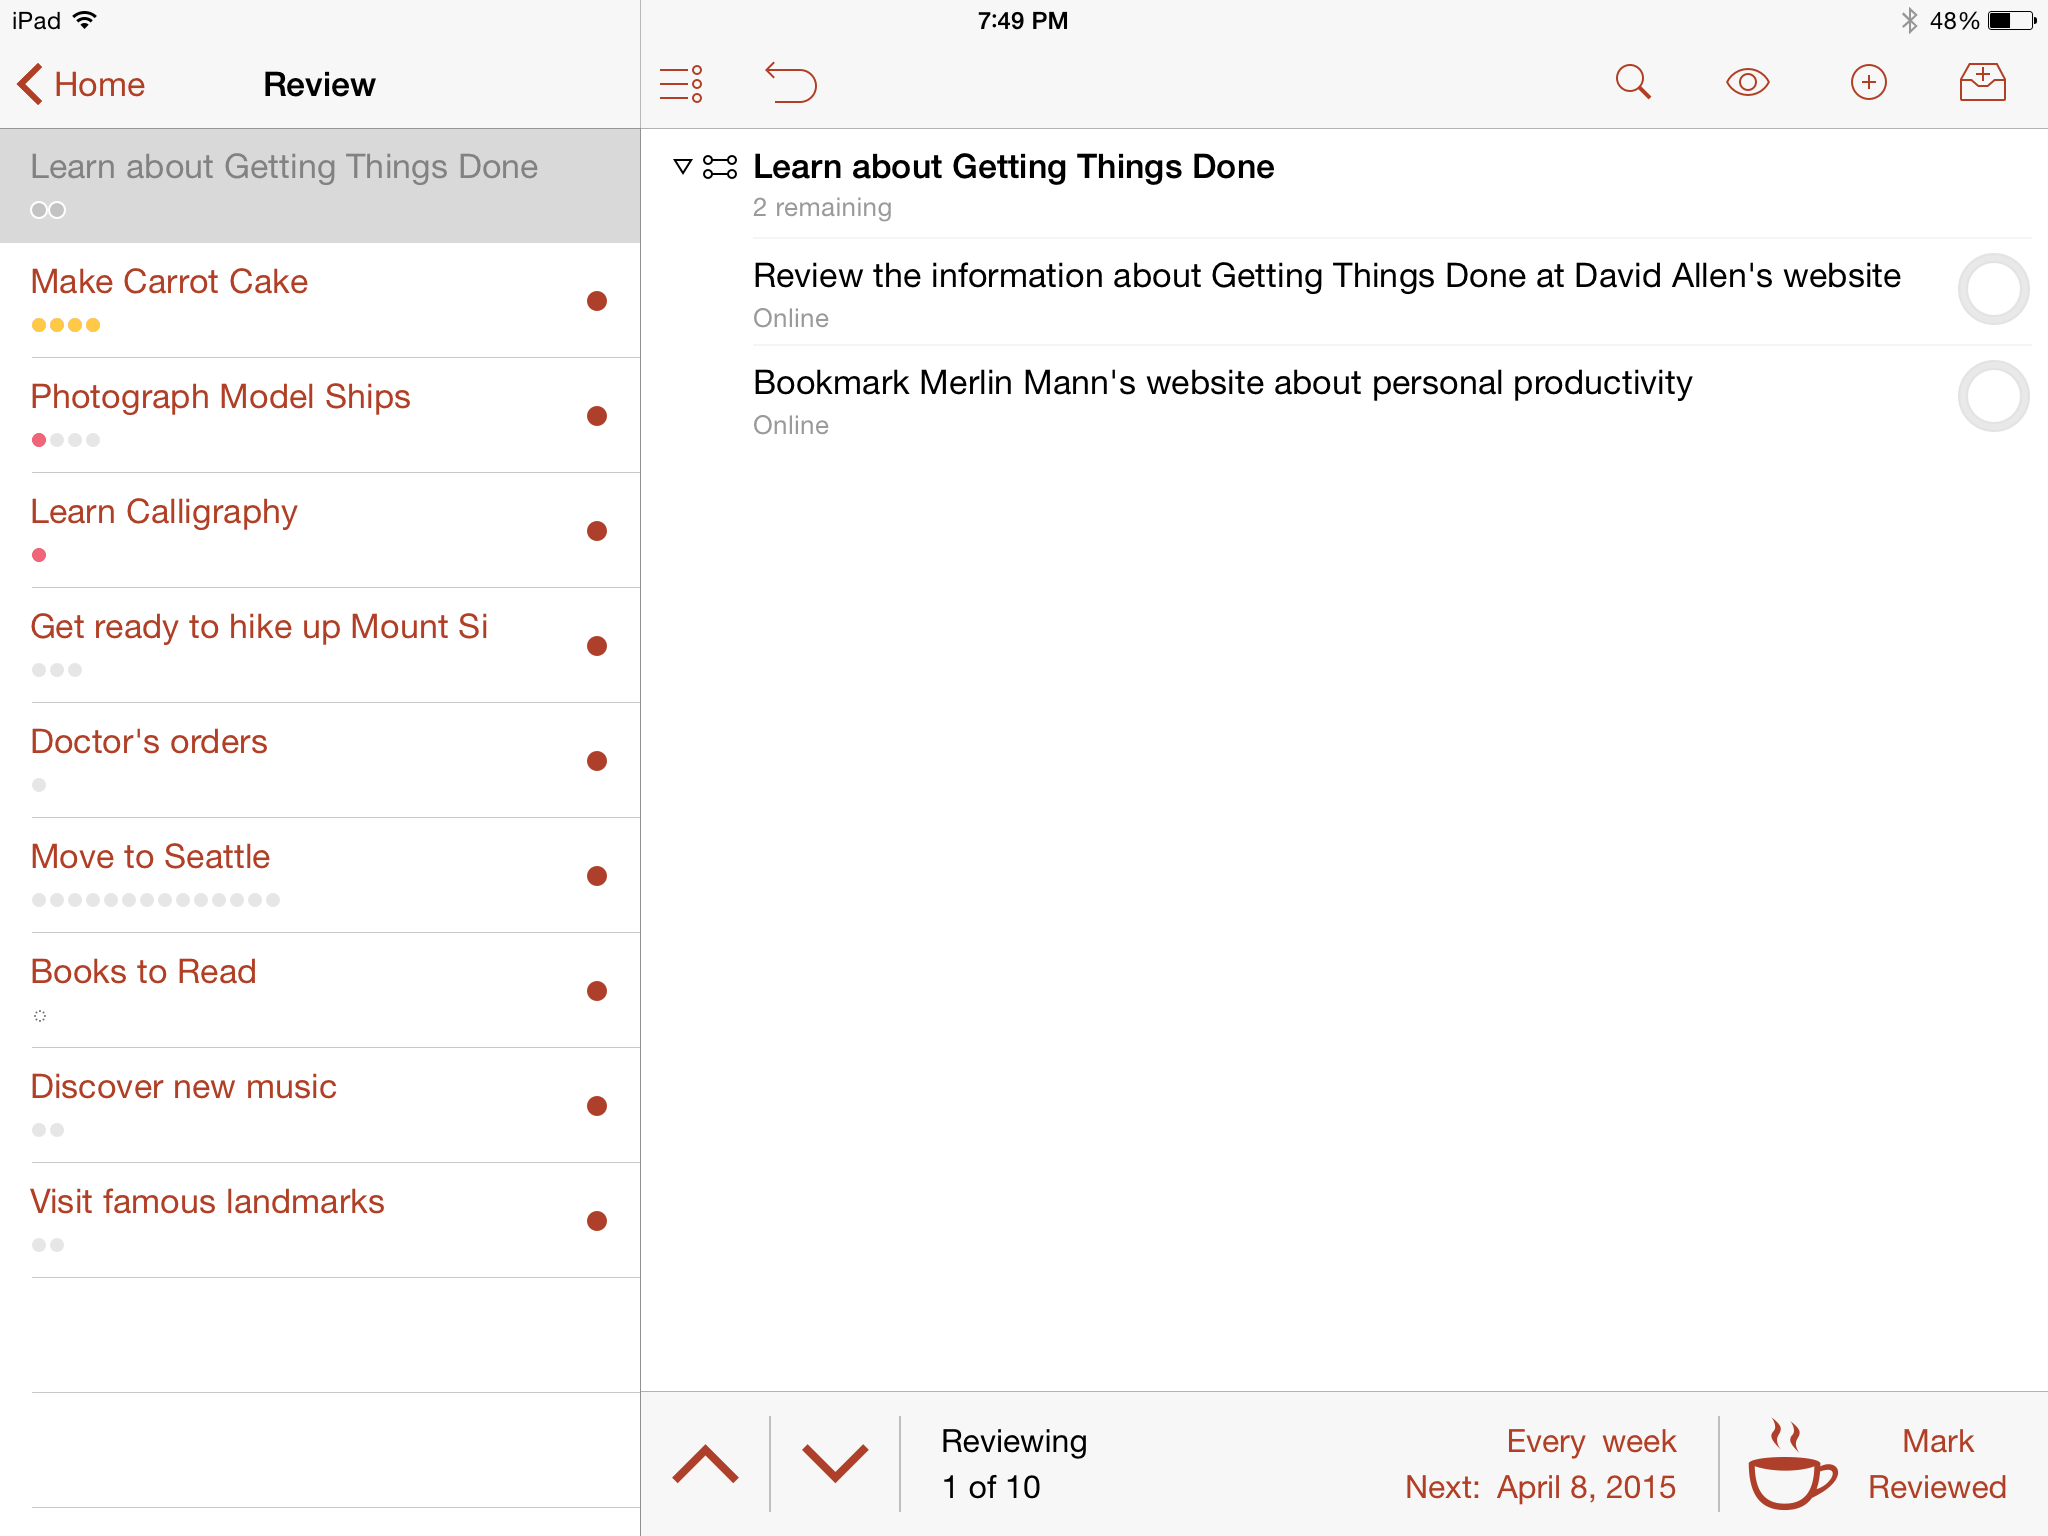 An example of the Review perspective in OmniFocus 2 for iOS on iPad.